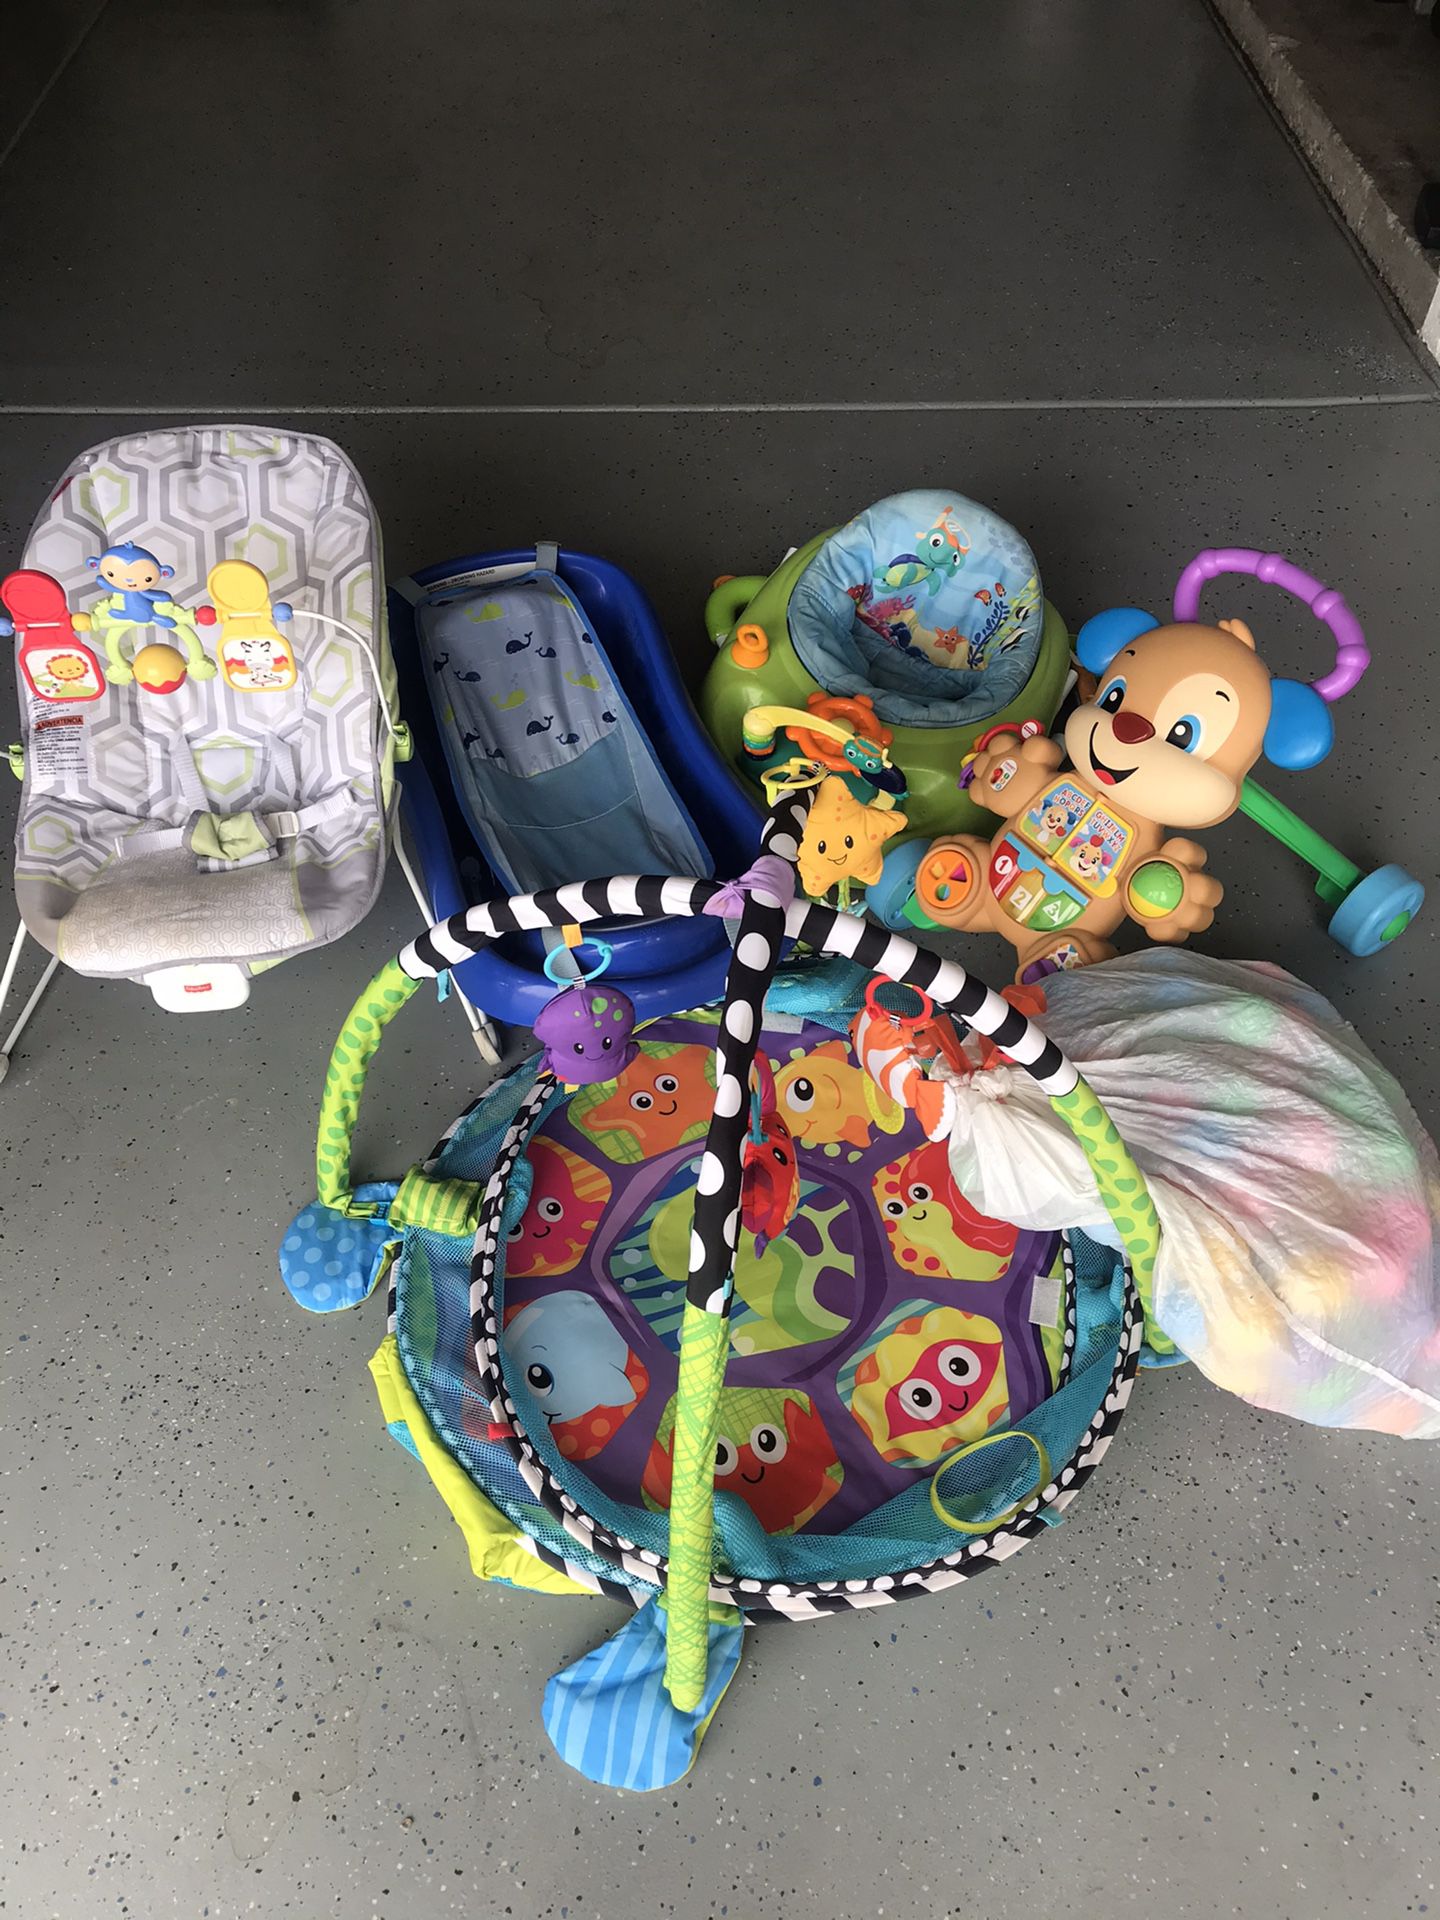 Lot of Baby/Toddler toys, good shape, CLEAN!